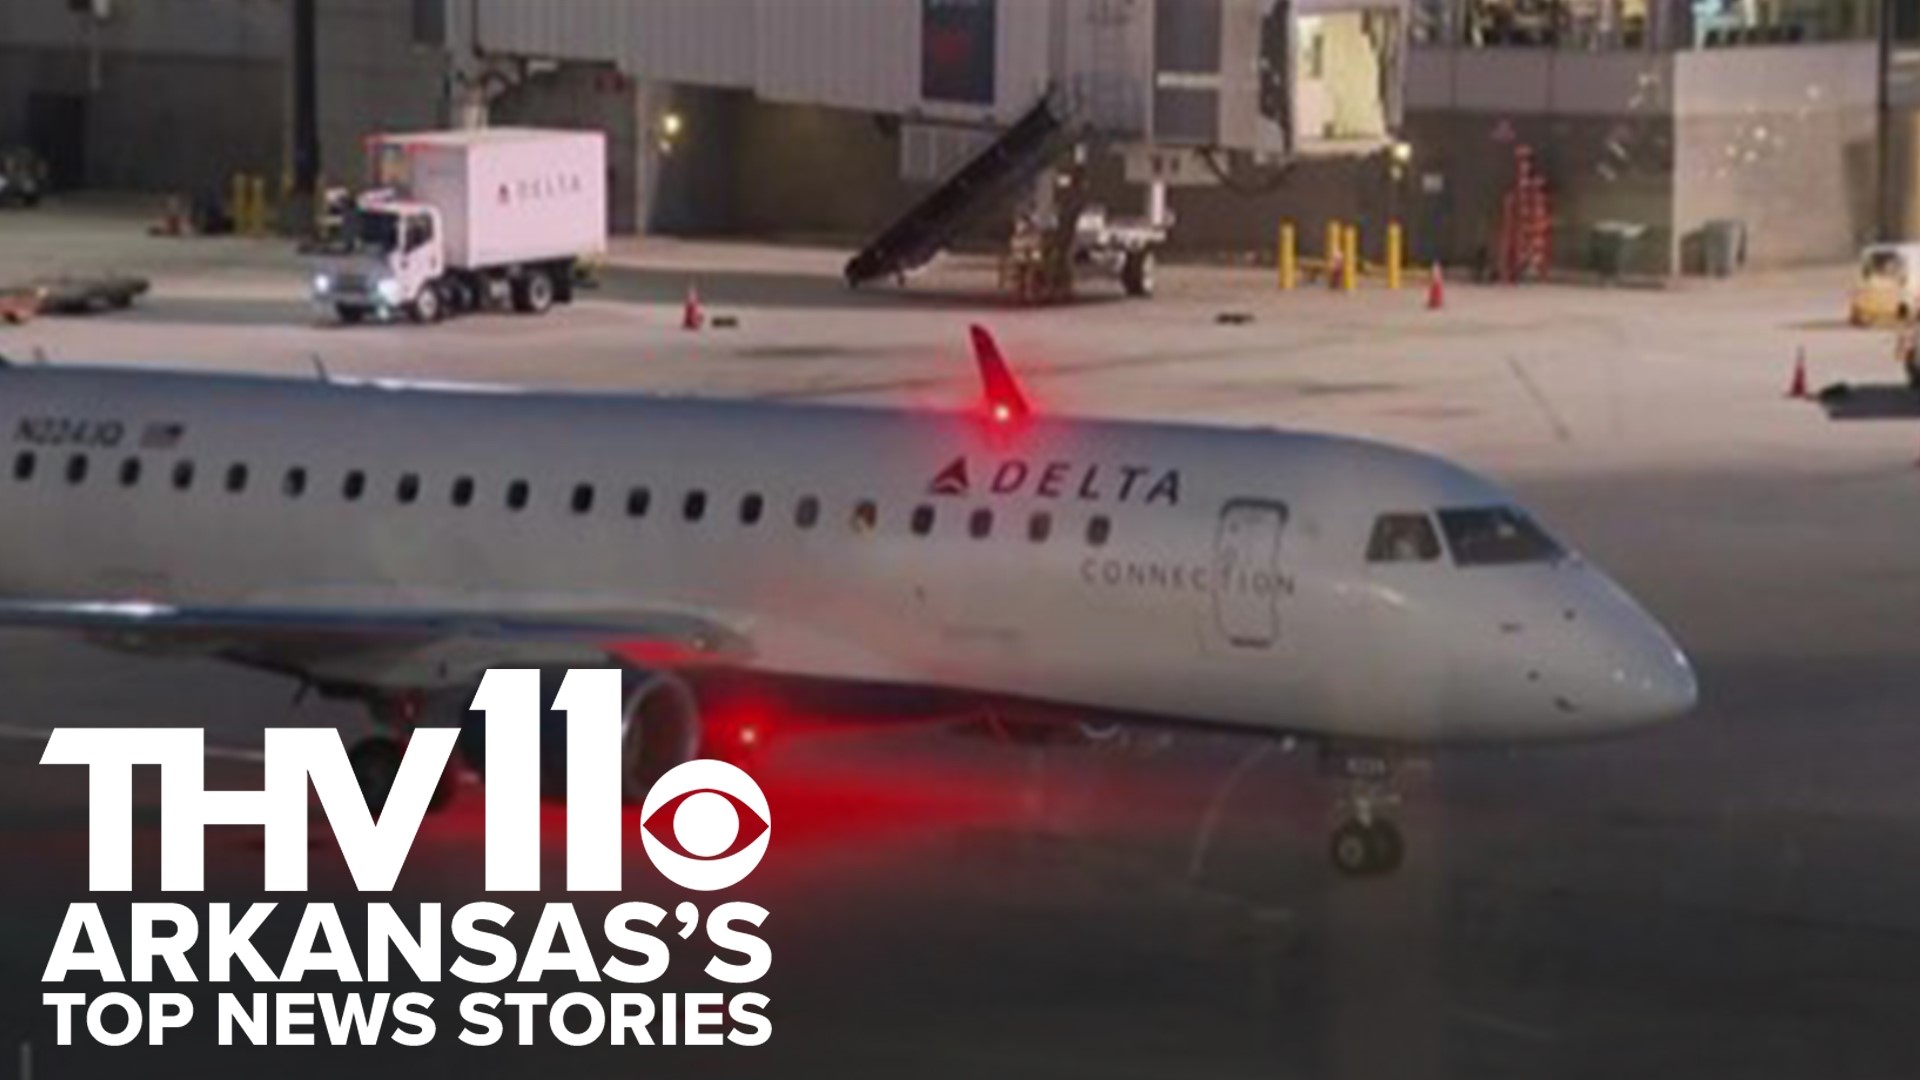 Karen Fuller delivers the latest news for June 20, 2022 including multiple air travel cancellations that is impacting thousands.